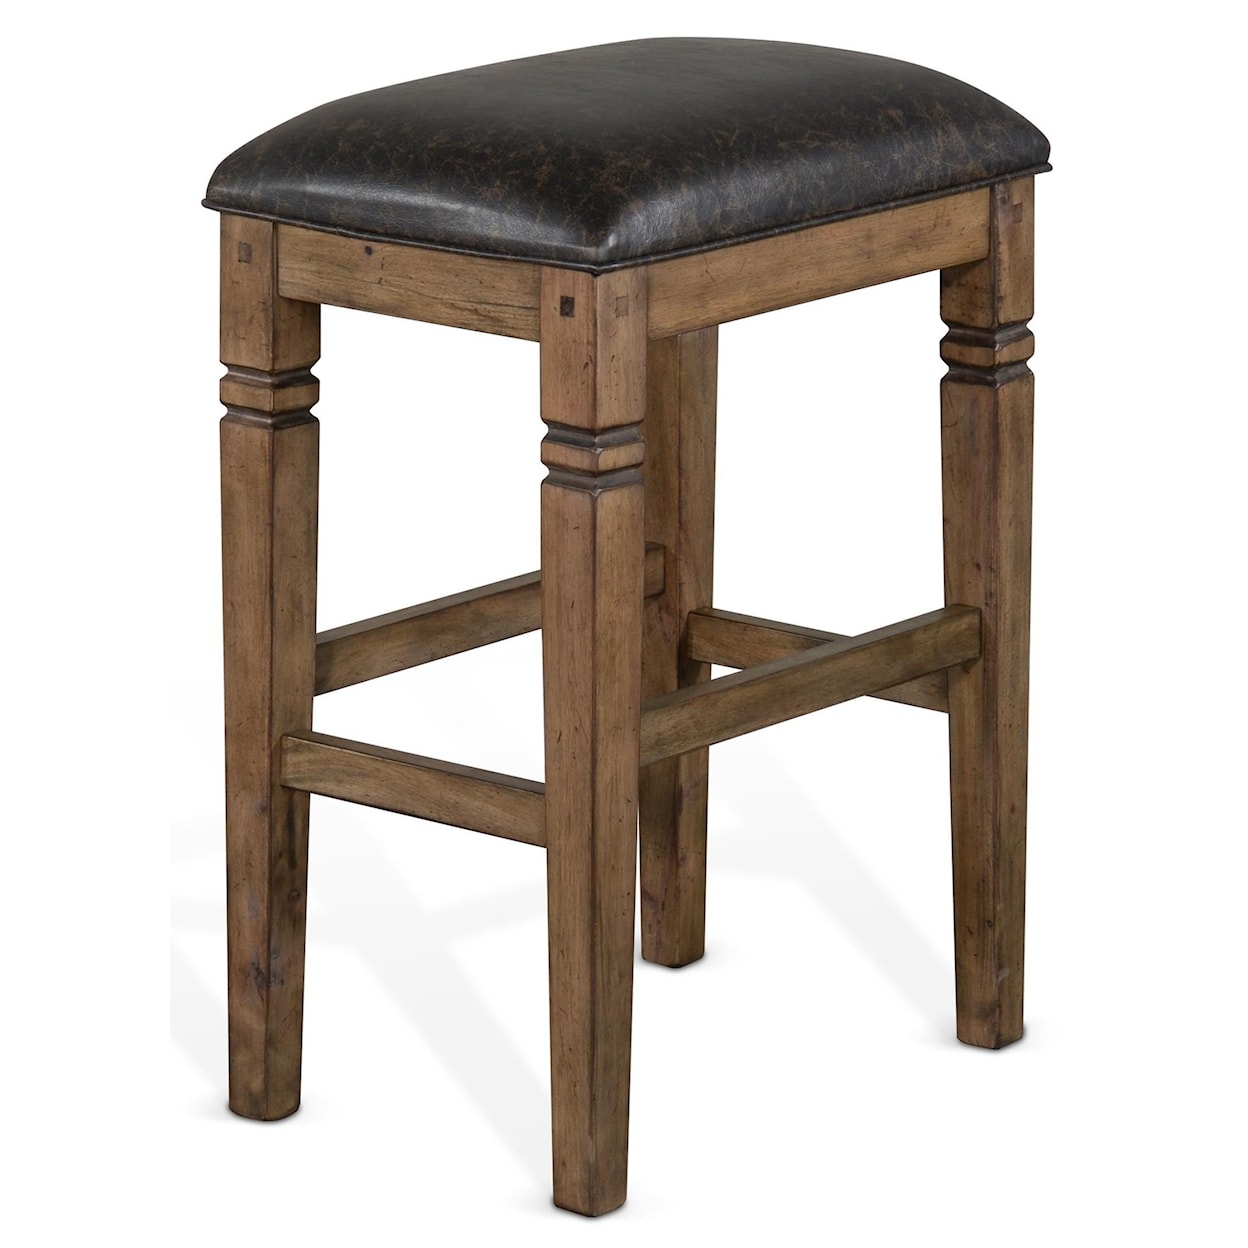 Sunny Designs Doe Valley Backless Stool with Cushion Seat